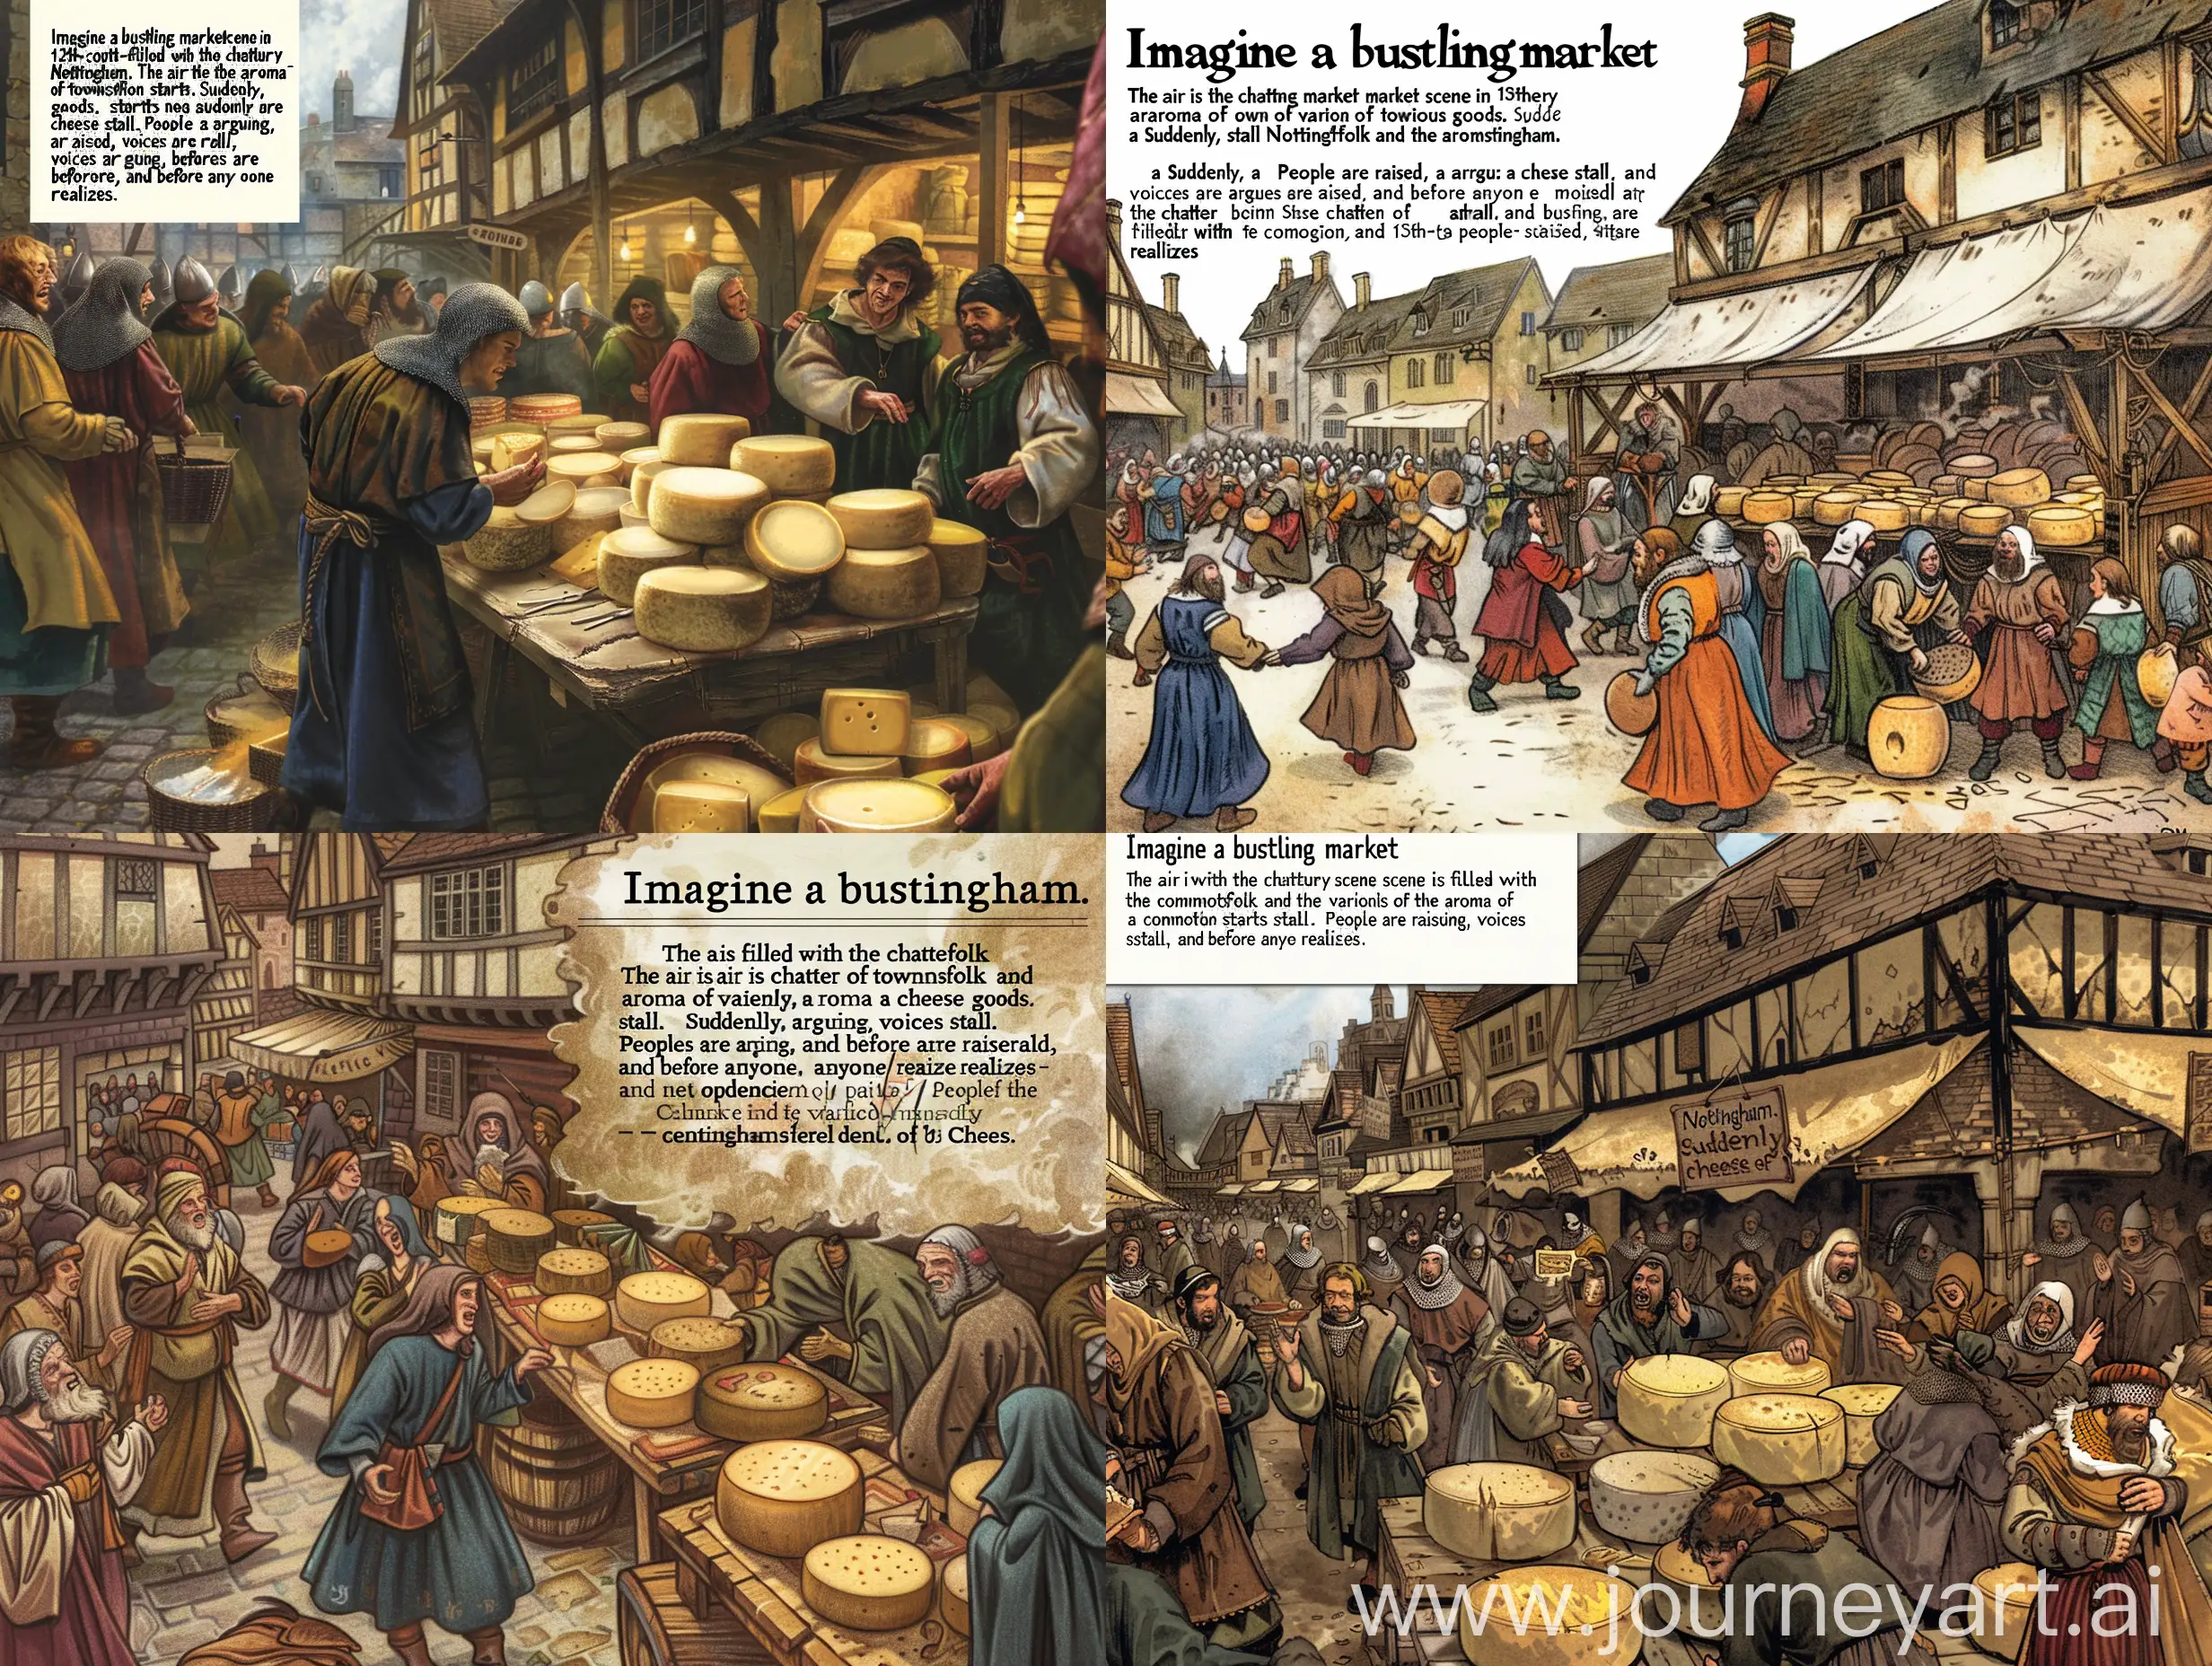 Medieval-Market-Riot-Chaos-Erupts-at-the-Cheese-Stall